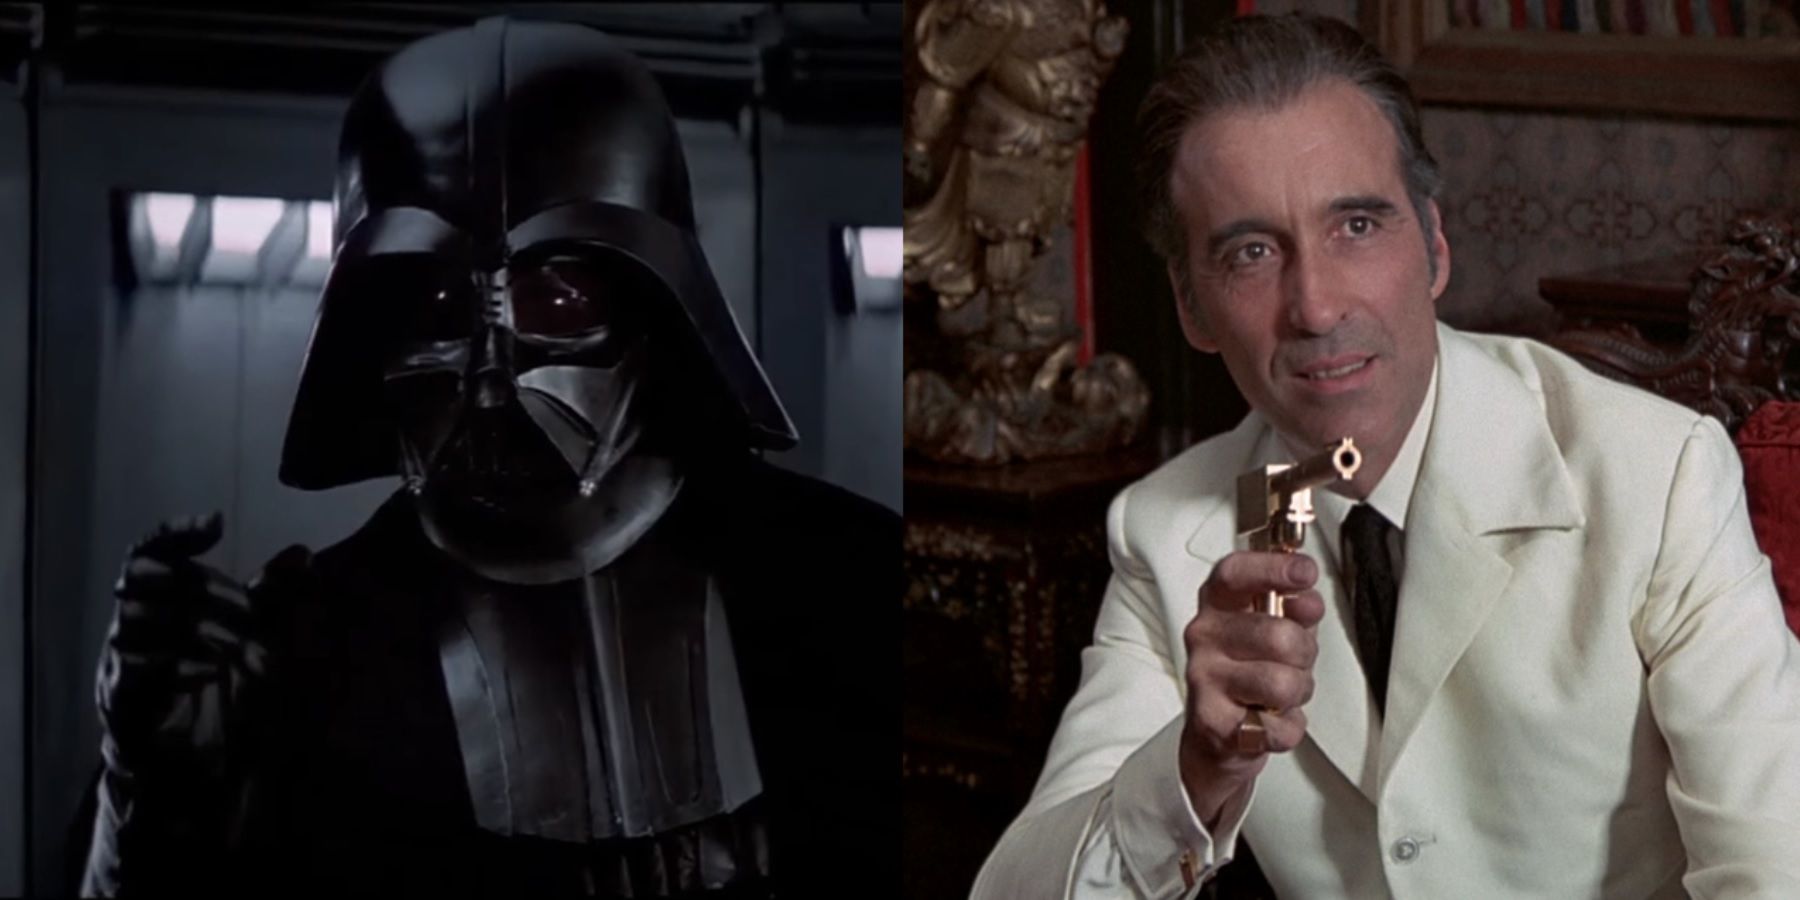 Split image of Darth Vader in Star Wars and Scaramanga in The Man with the Golden Gun